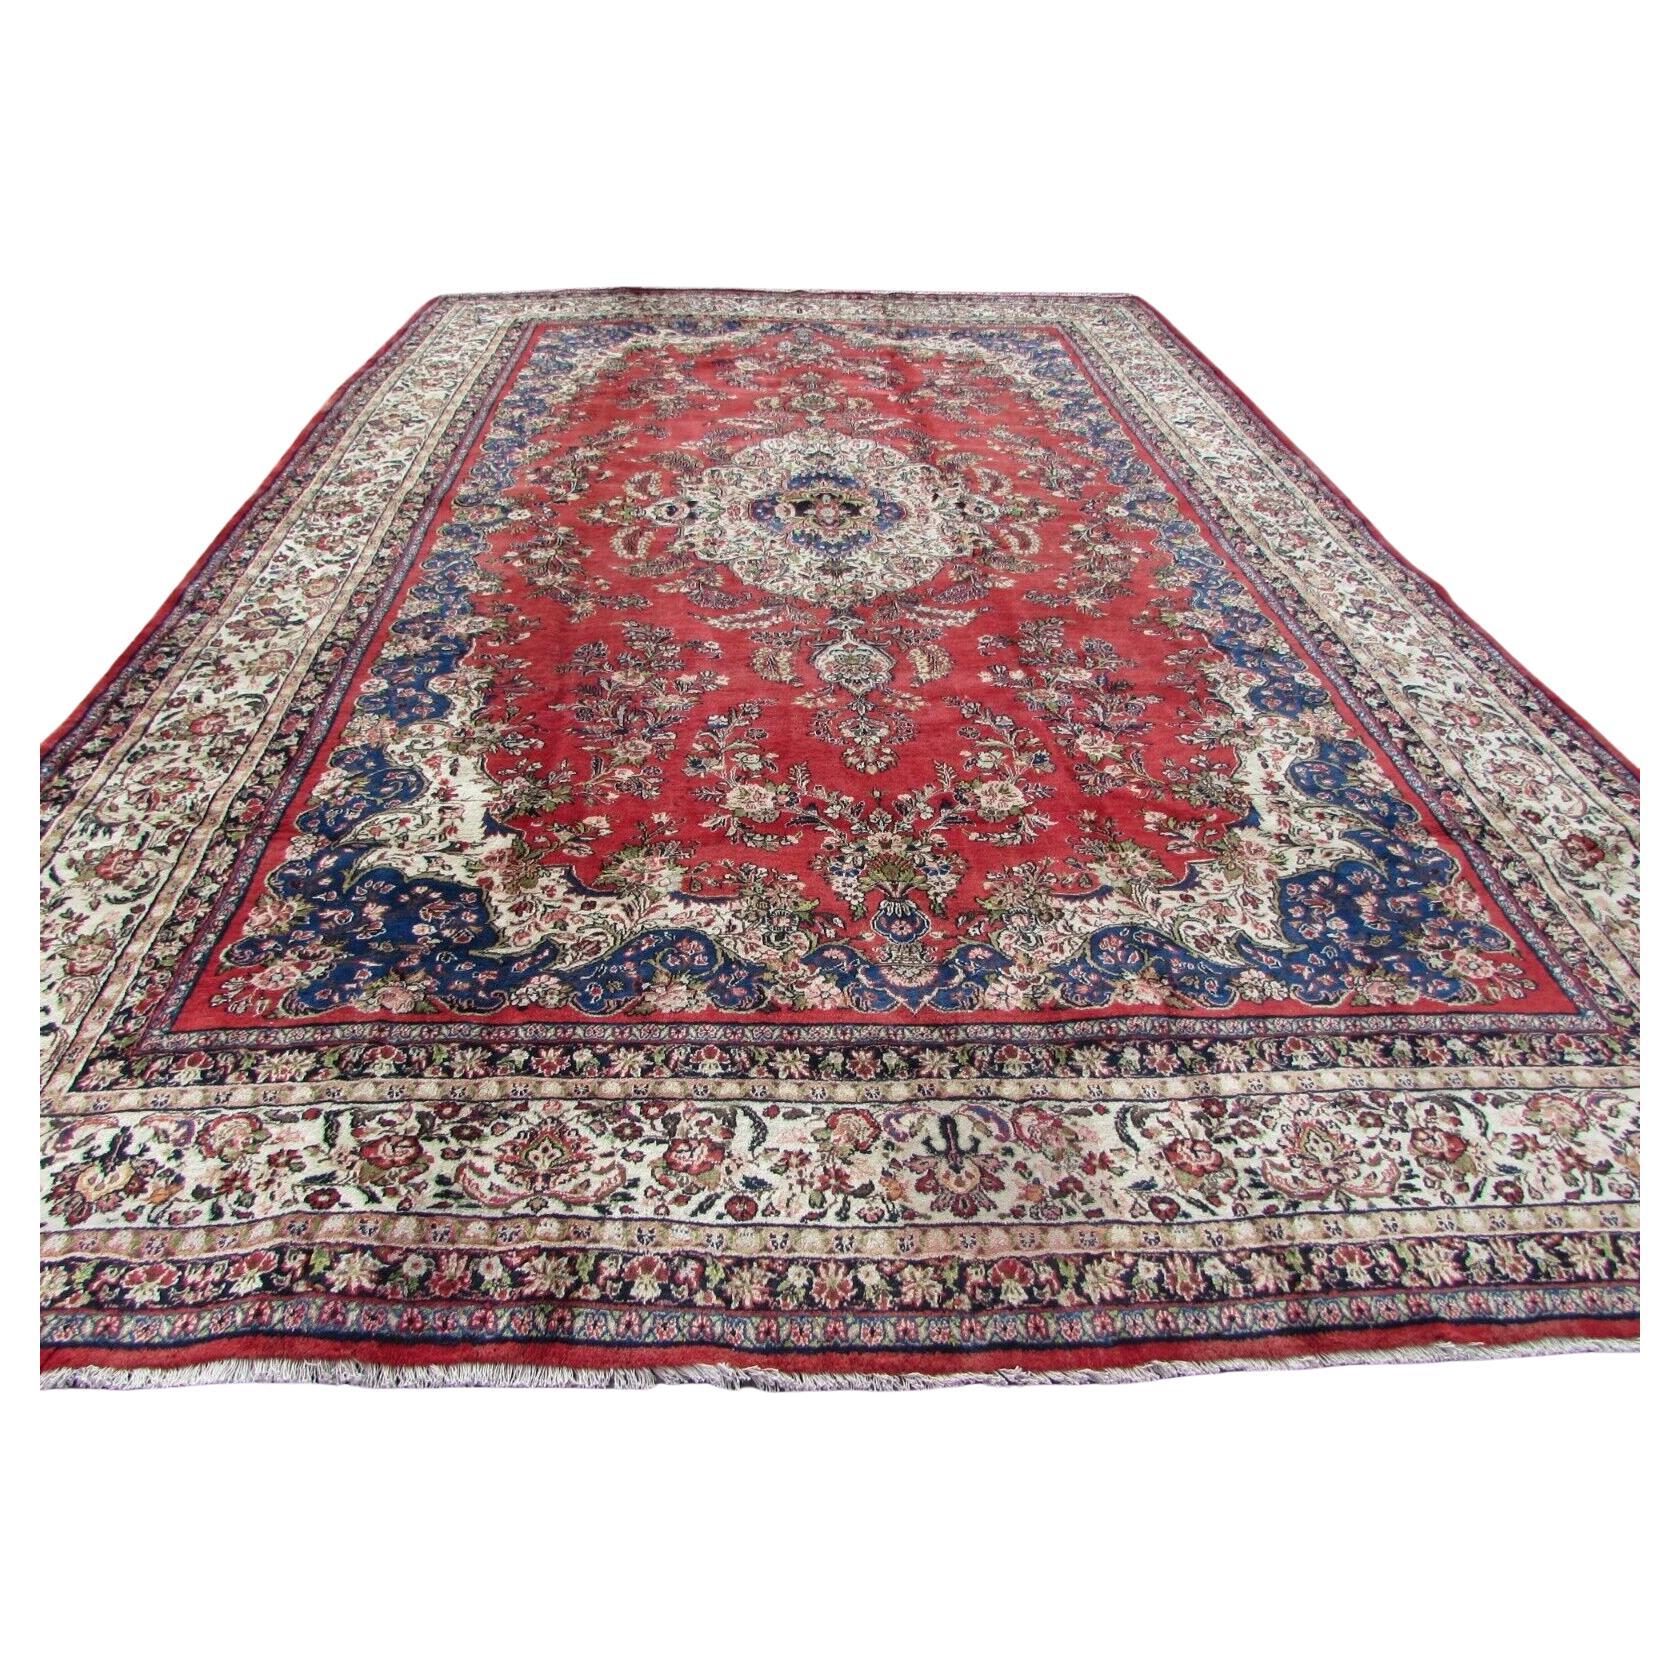 Handmade Vintage Persian Style Sarouk Oversize Rug 10.7' x 16.4', 1970s - 1Q72 For Sale